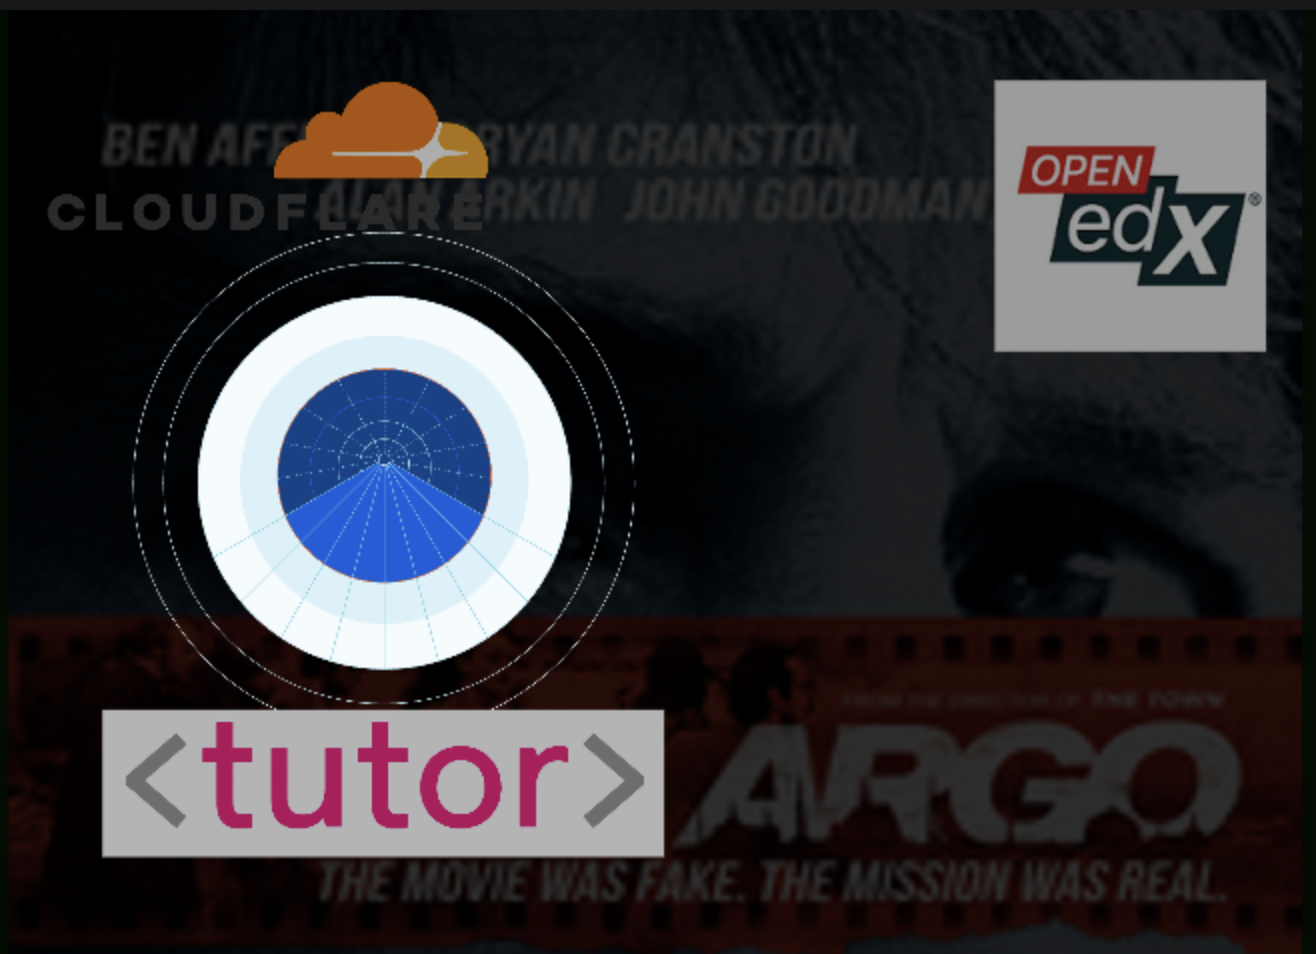 Top to bttom, left to right, Clouflare logo, Open edX logo, Cloudflare tunnel logo, Tutor logo. Background, Argo movie poster from Wikipedia.